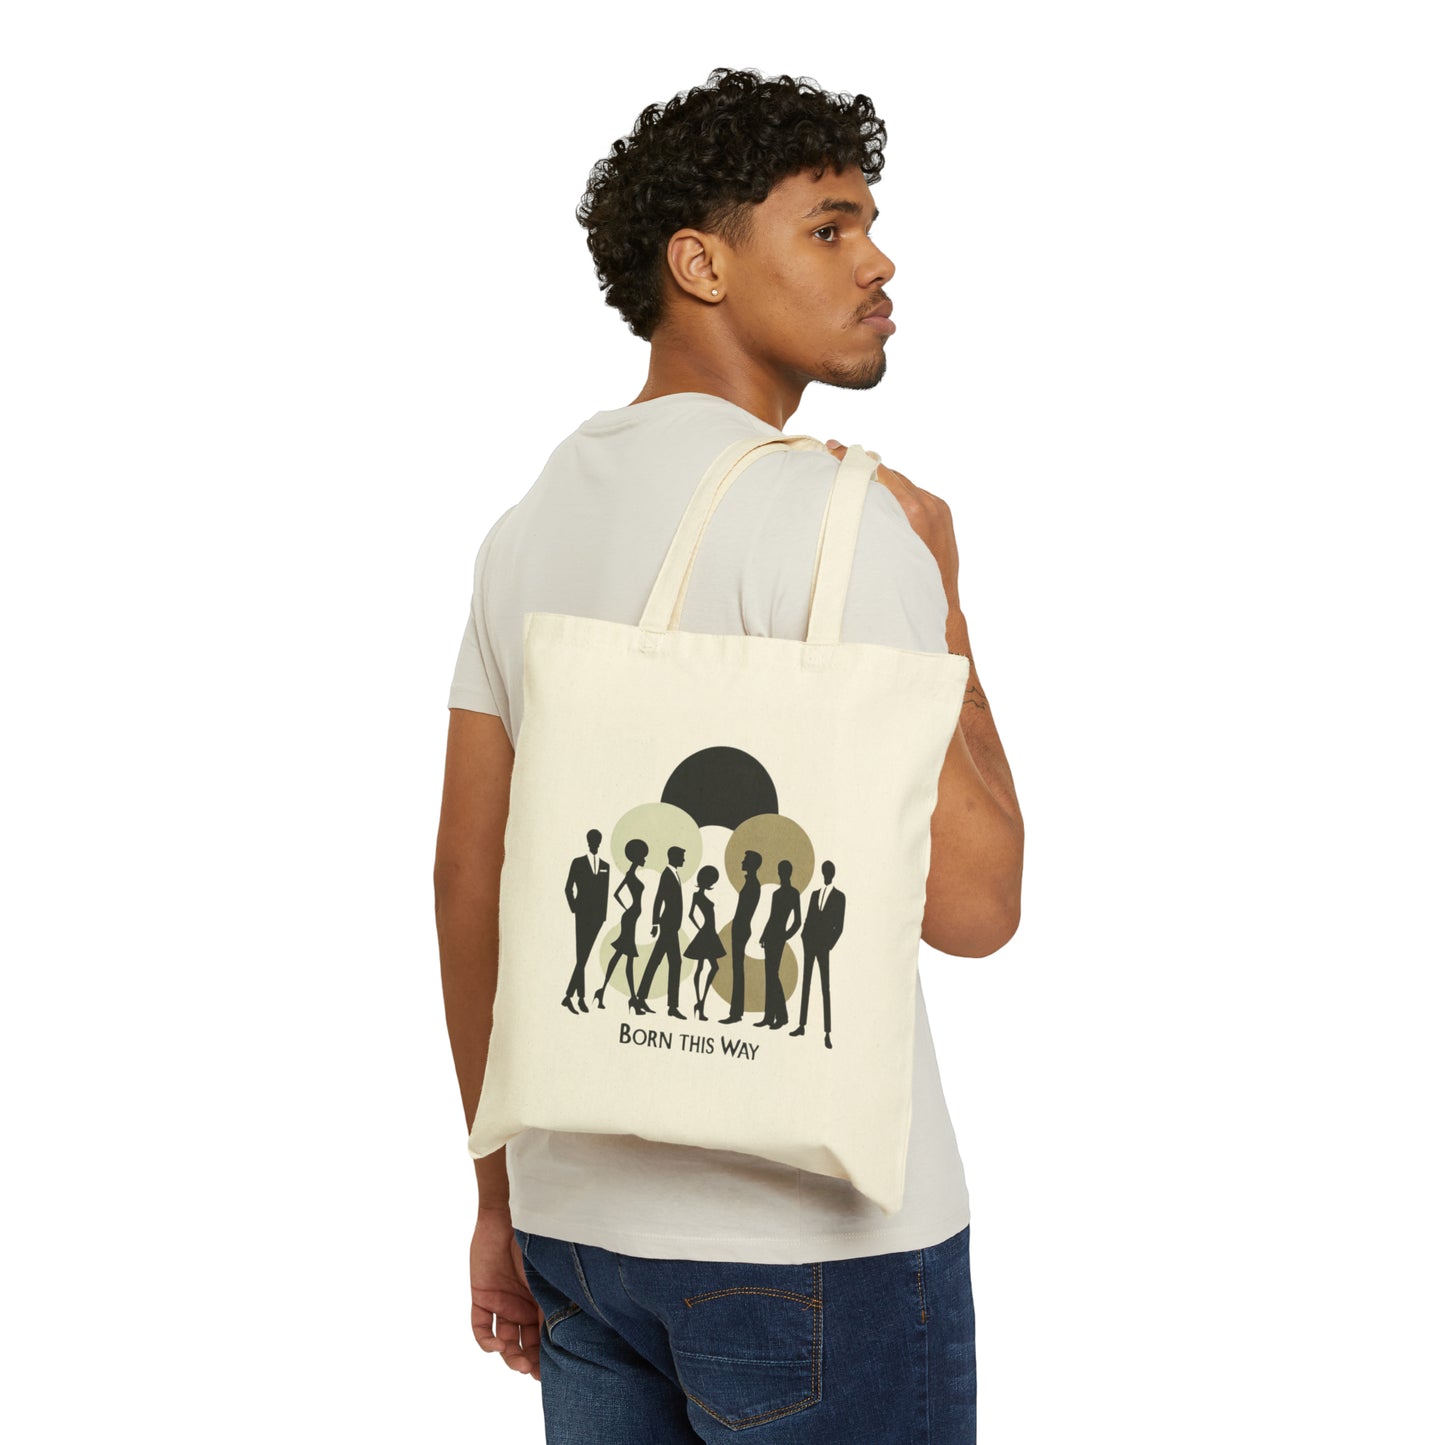 Born this Way! Inspire wtih Statement Cotton Canvas Tote Bag| laptop, kindle, phone, notebook, goodies to work/coffee shop | Political Vote